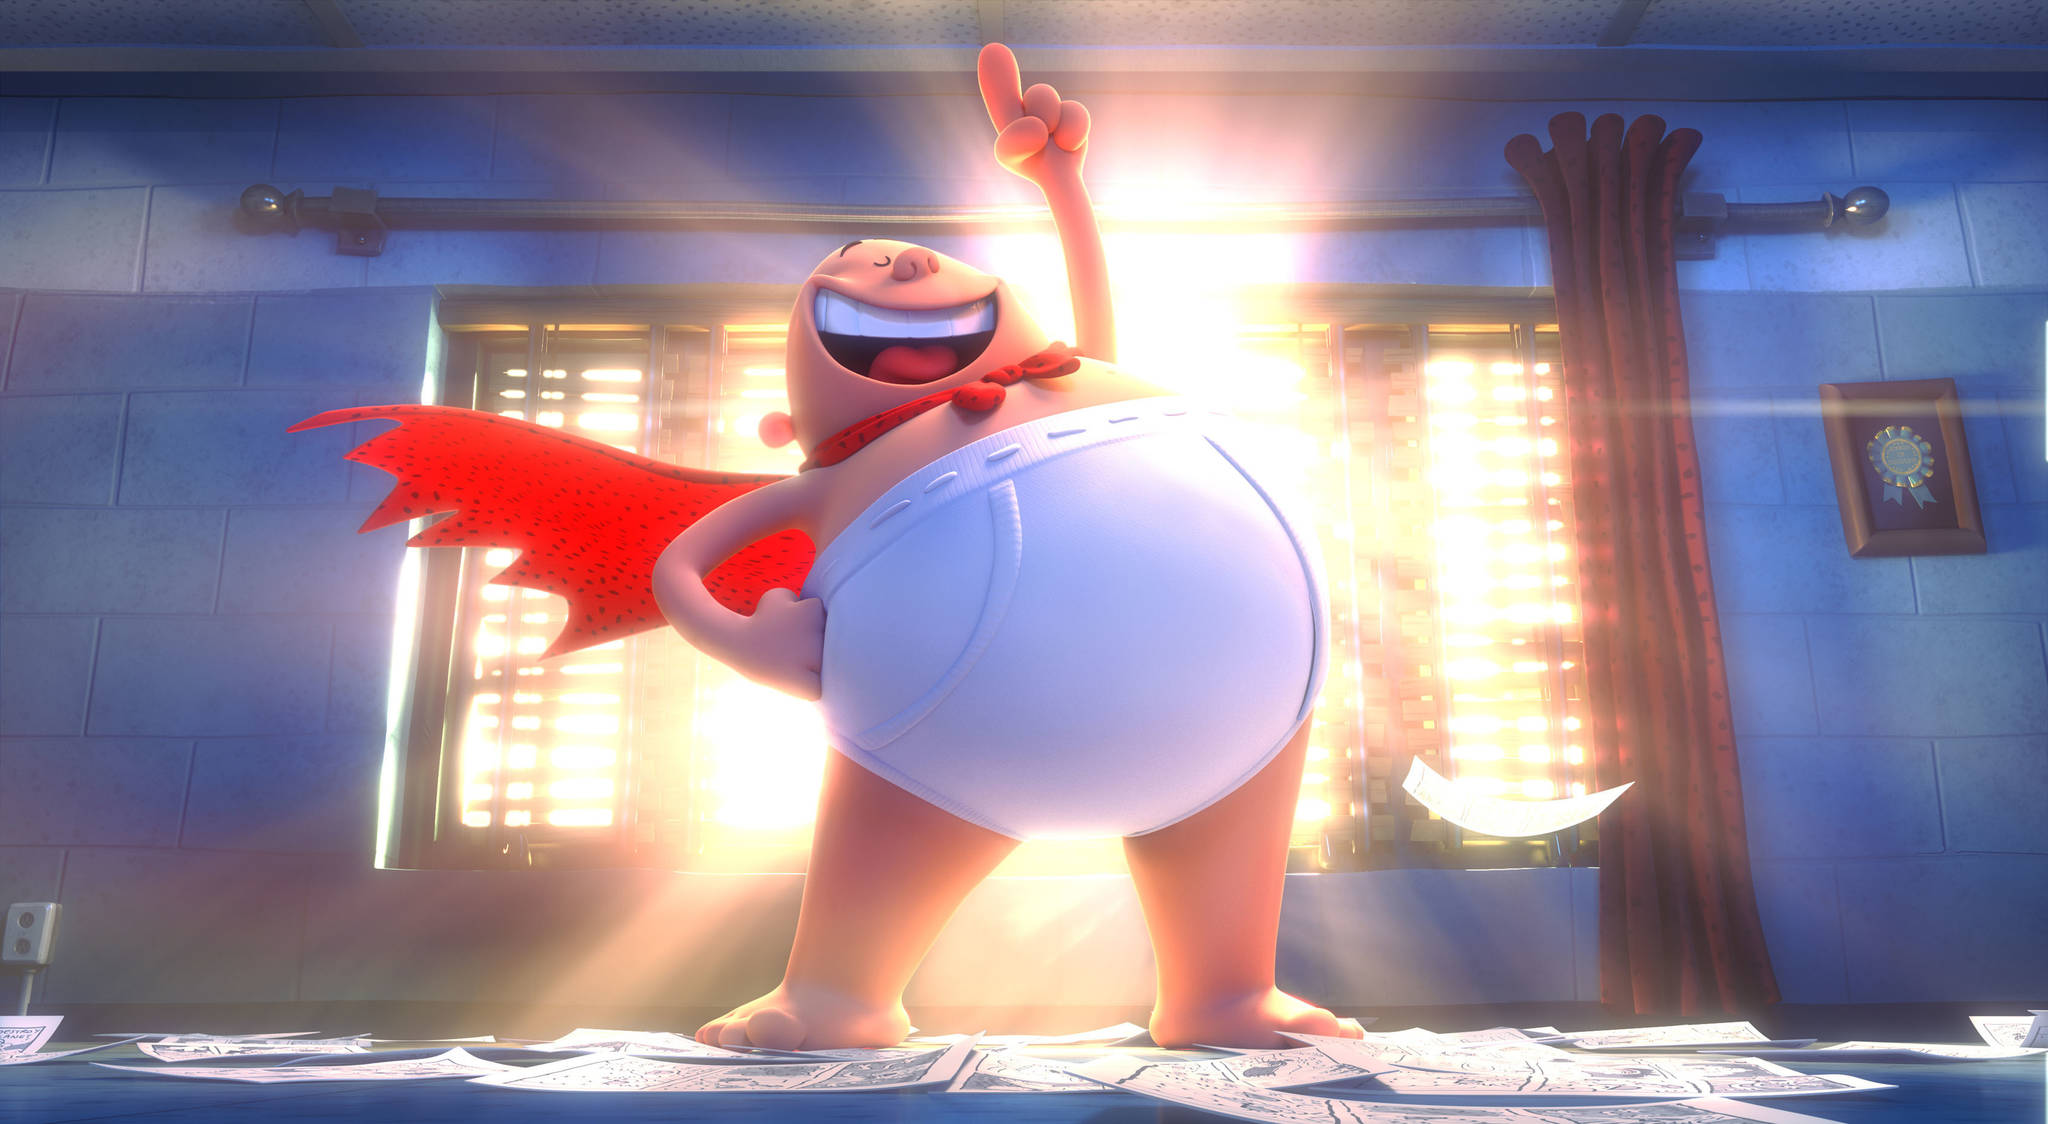 This image released by DreamWorks Animation shows Captain Underpants, voiced by Ed Helms, in a scene from “Captain Underpants: The First Epic Movie.” (DreamWorks Animation via AP)